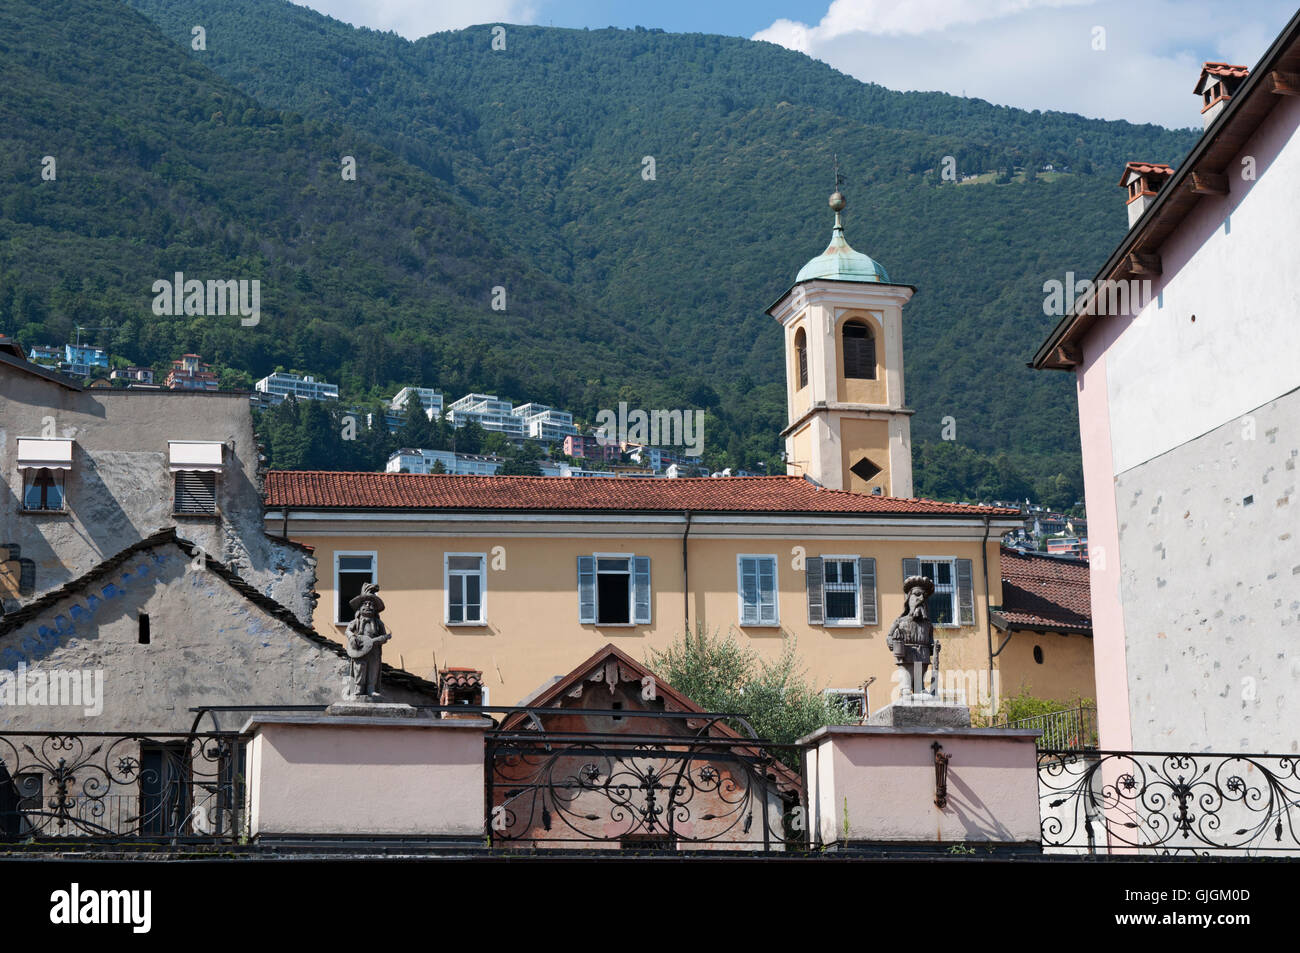 Switzerland: skyline of Locarno, a town on the northern tip of Lake Maggiore in the Swiss Canton of Ticino Stock Photo